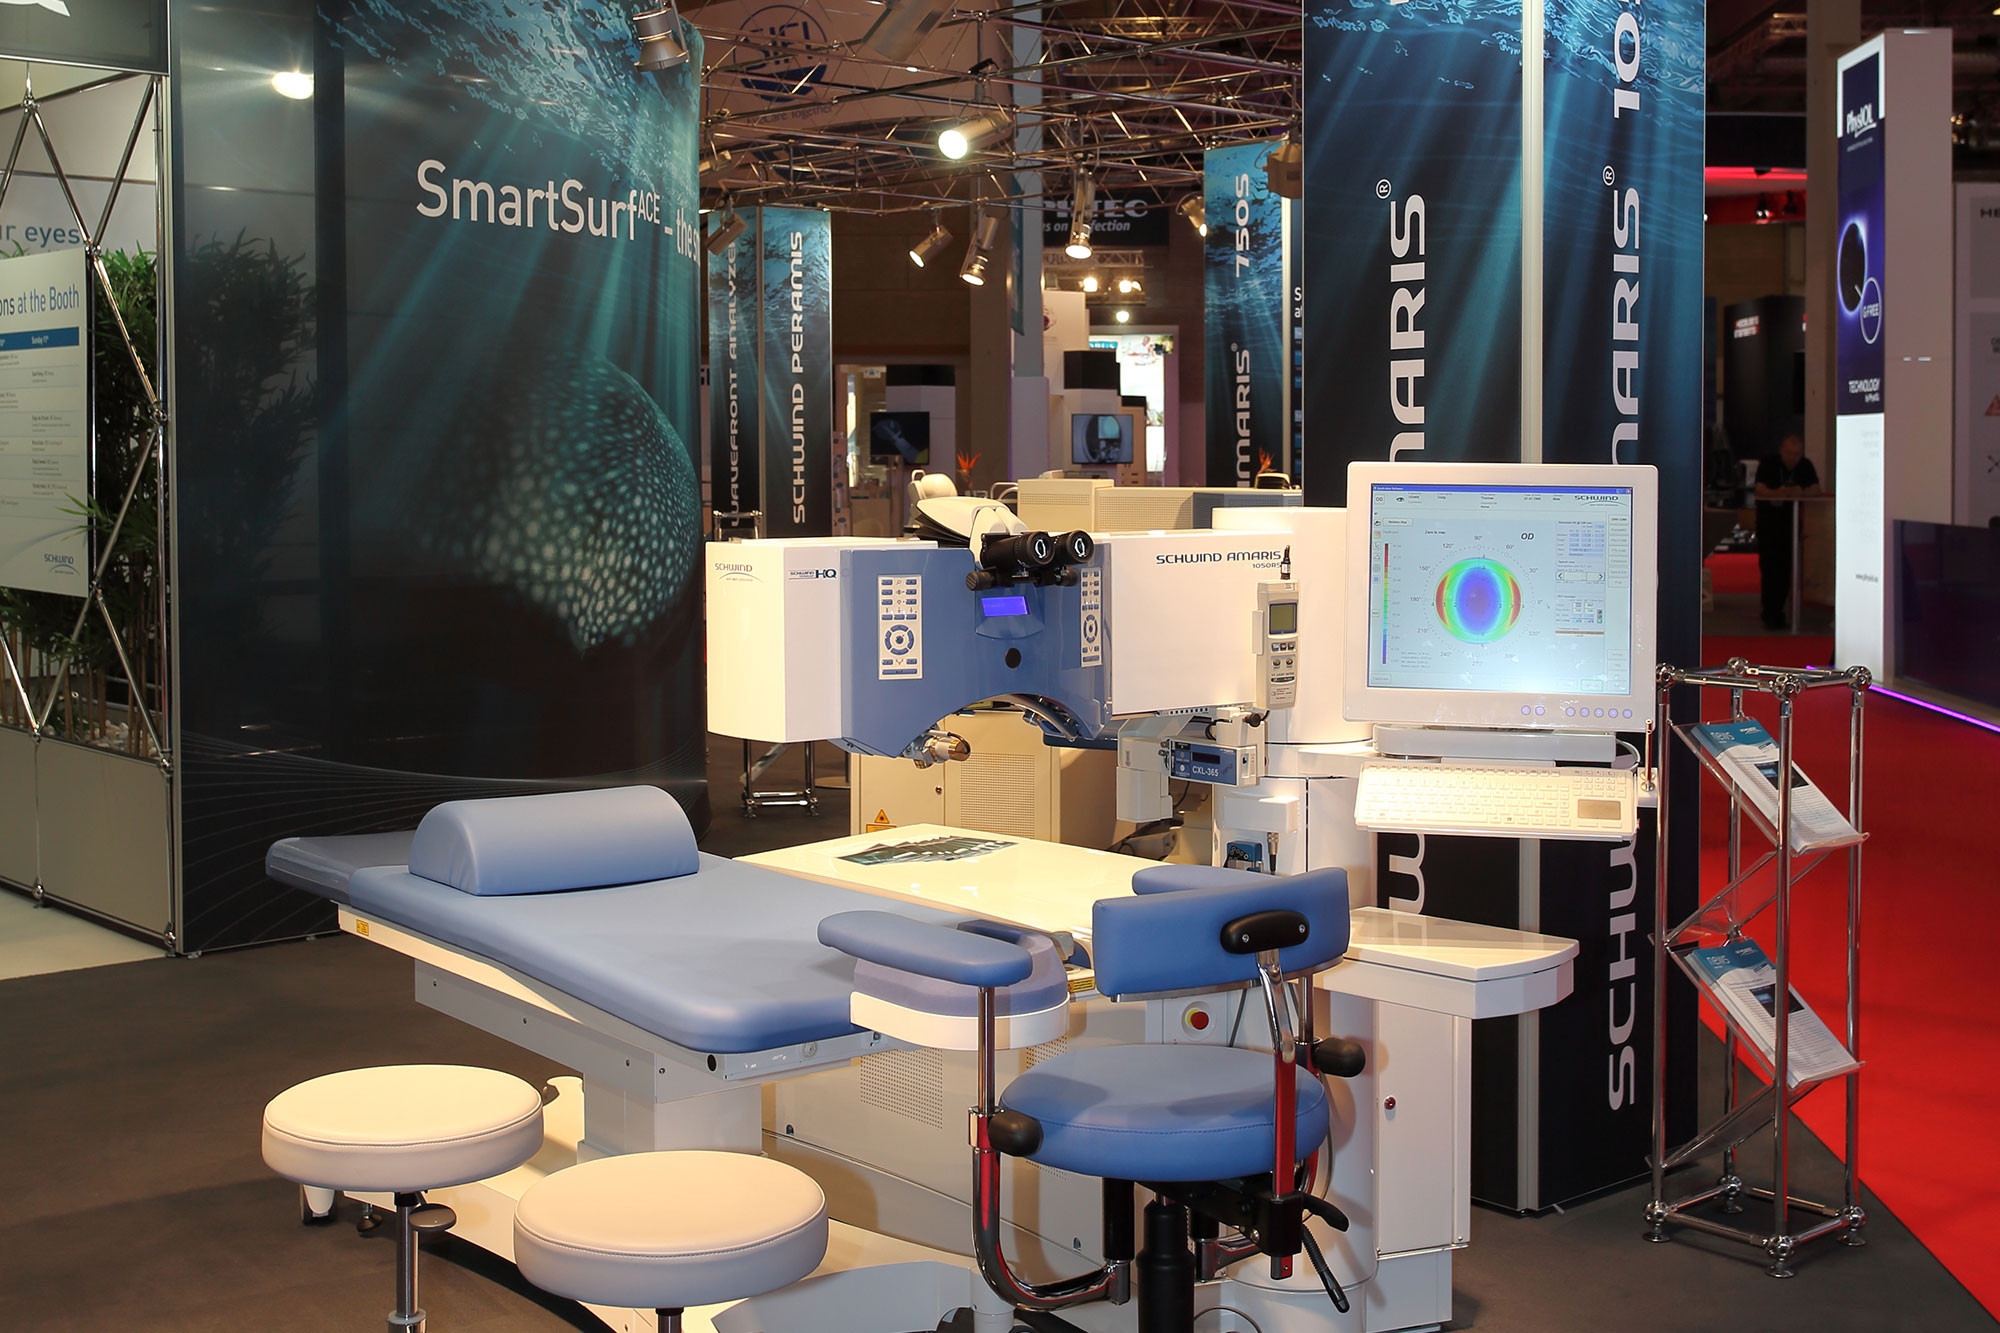 Exhibition stand of Schwind at the ESCRS 2016